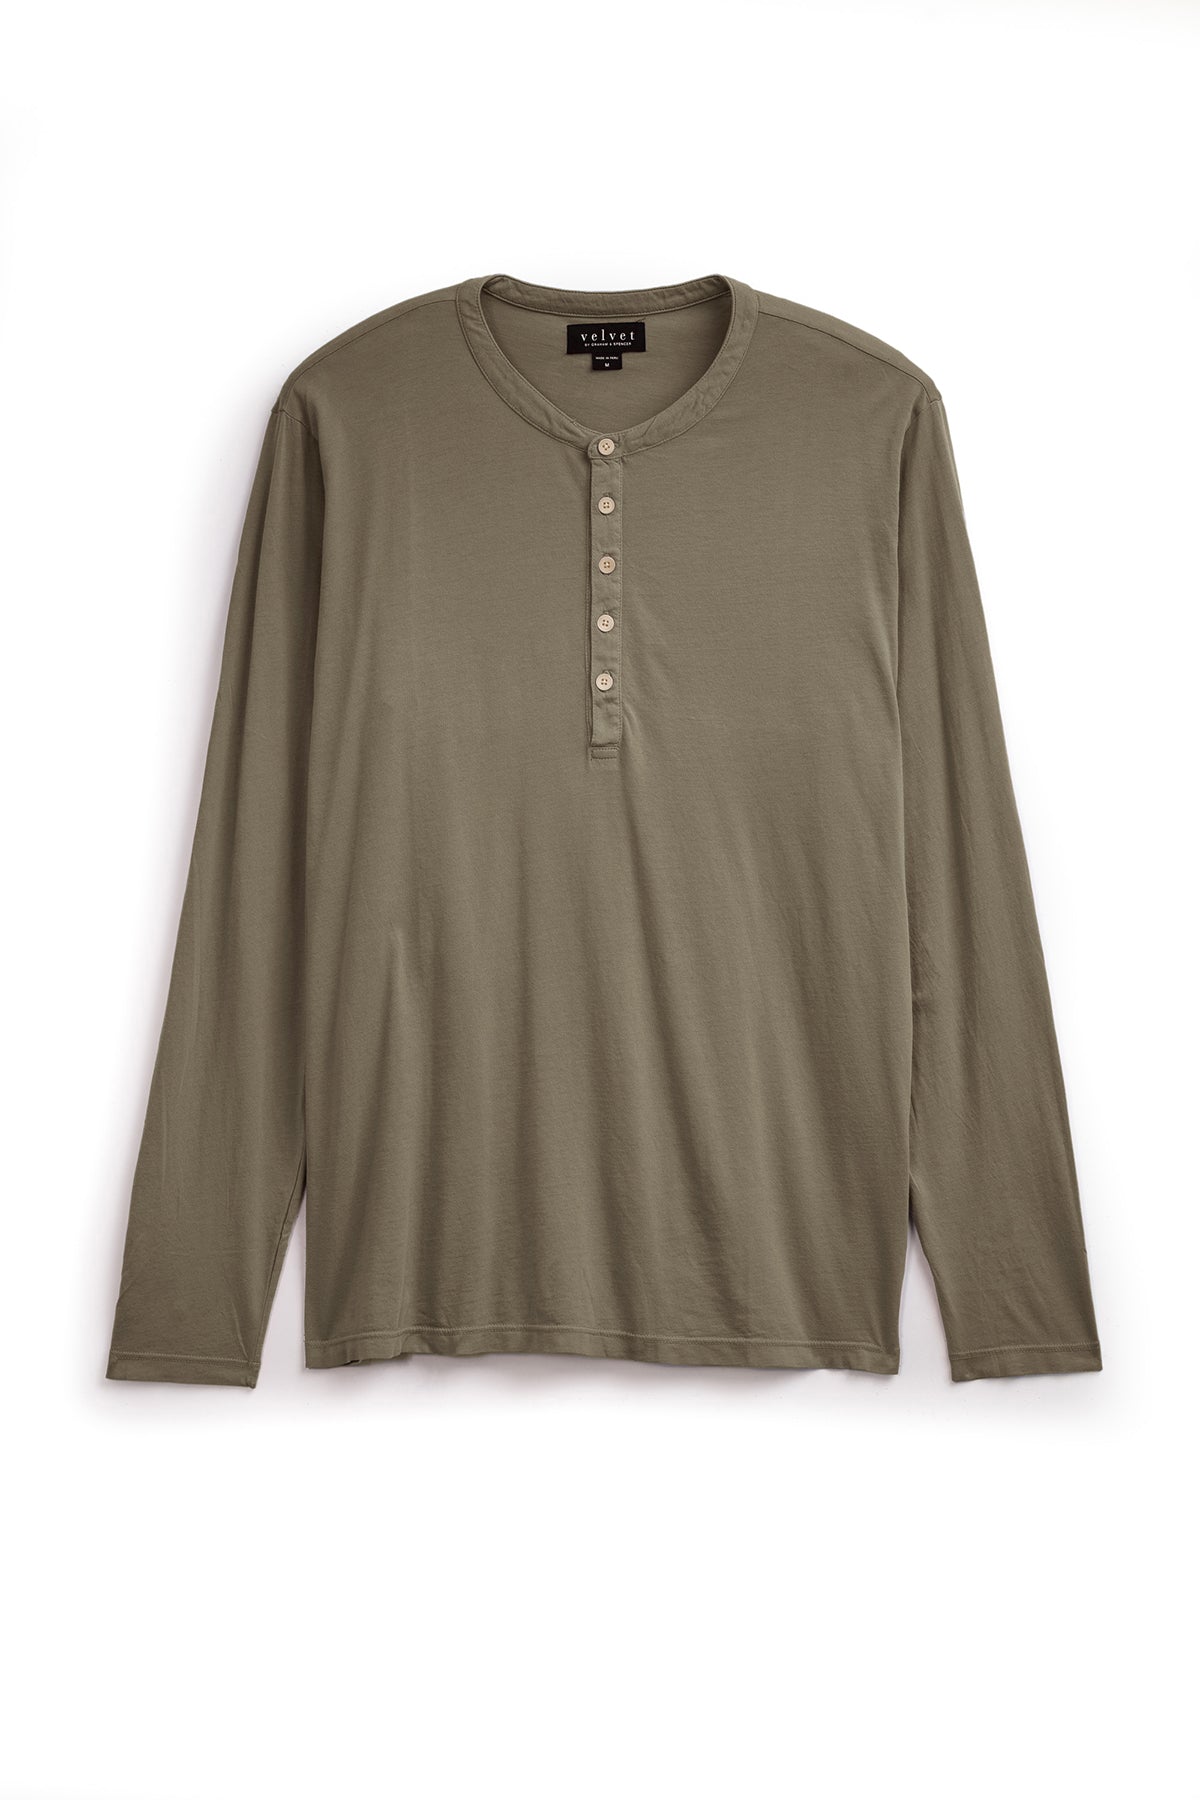 Olive green long-sleeve ALVARO HENLEY with a buttoned placket, crafted from a whisper knit for a lightweight feel, displayed on a white background by Velvet by Graham & Spencer.-36009207824577